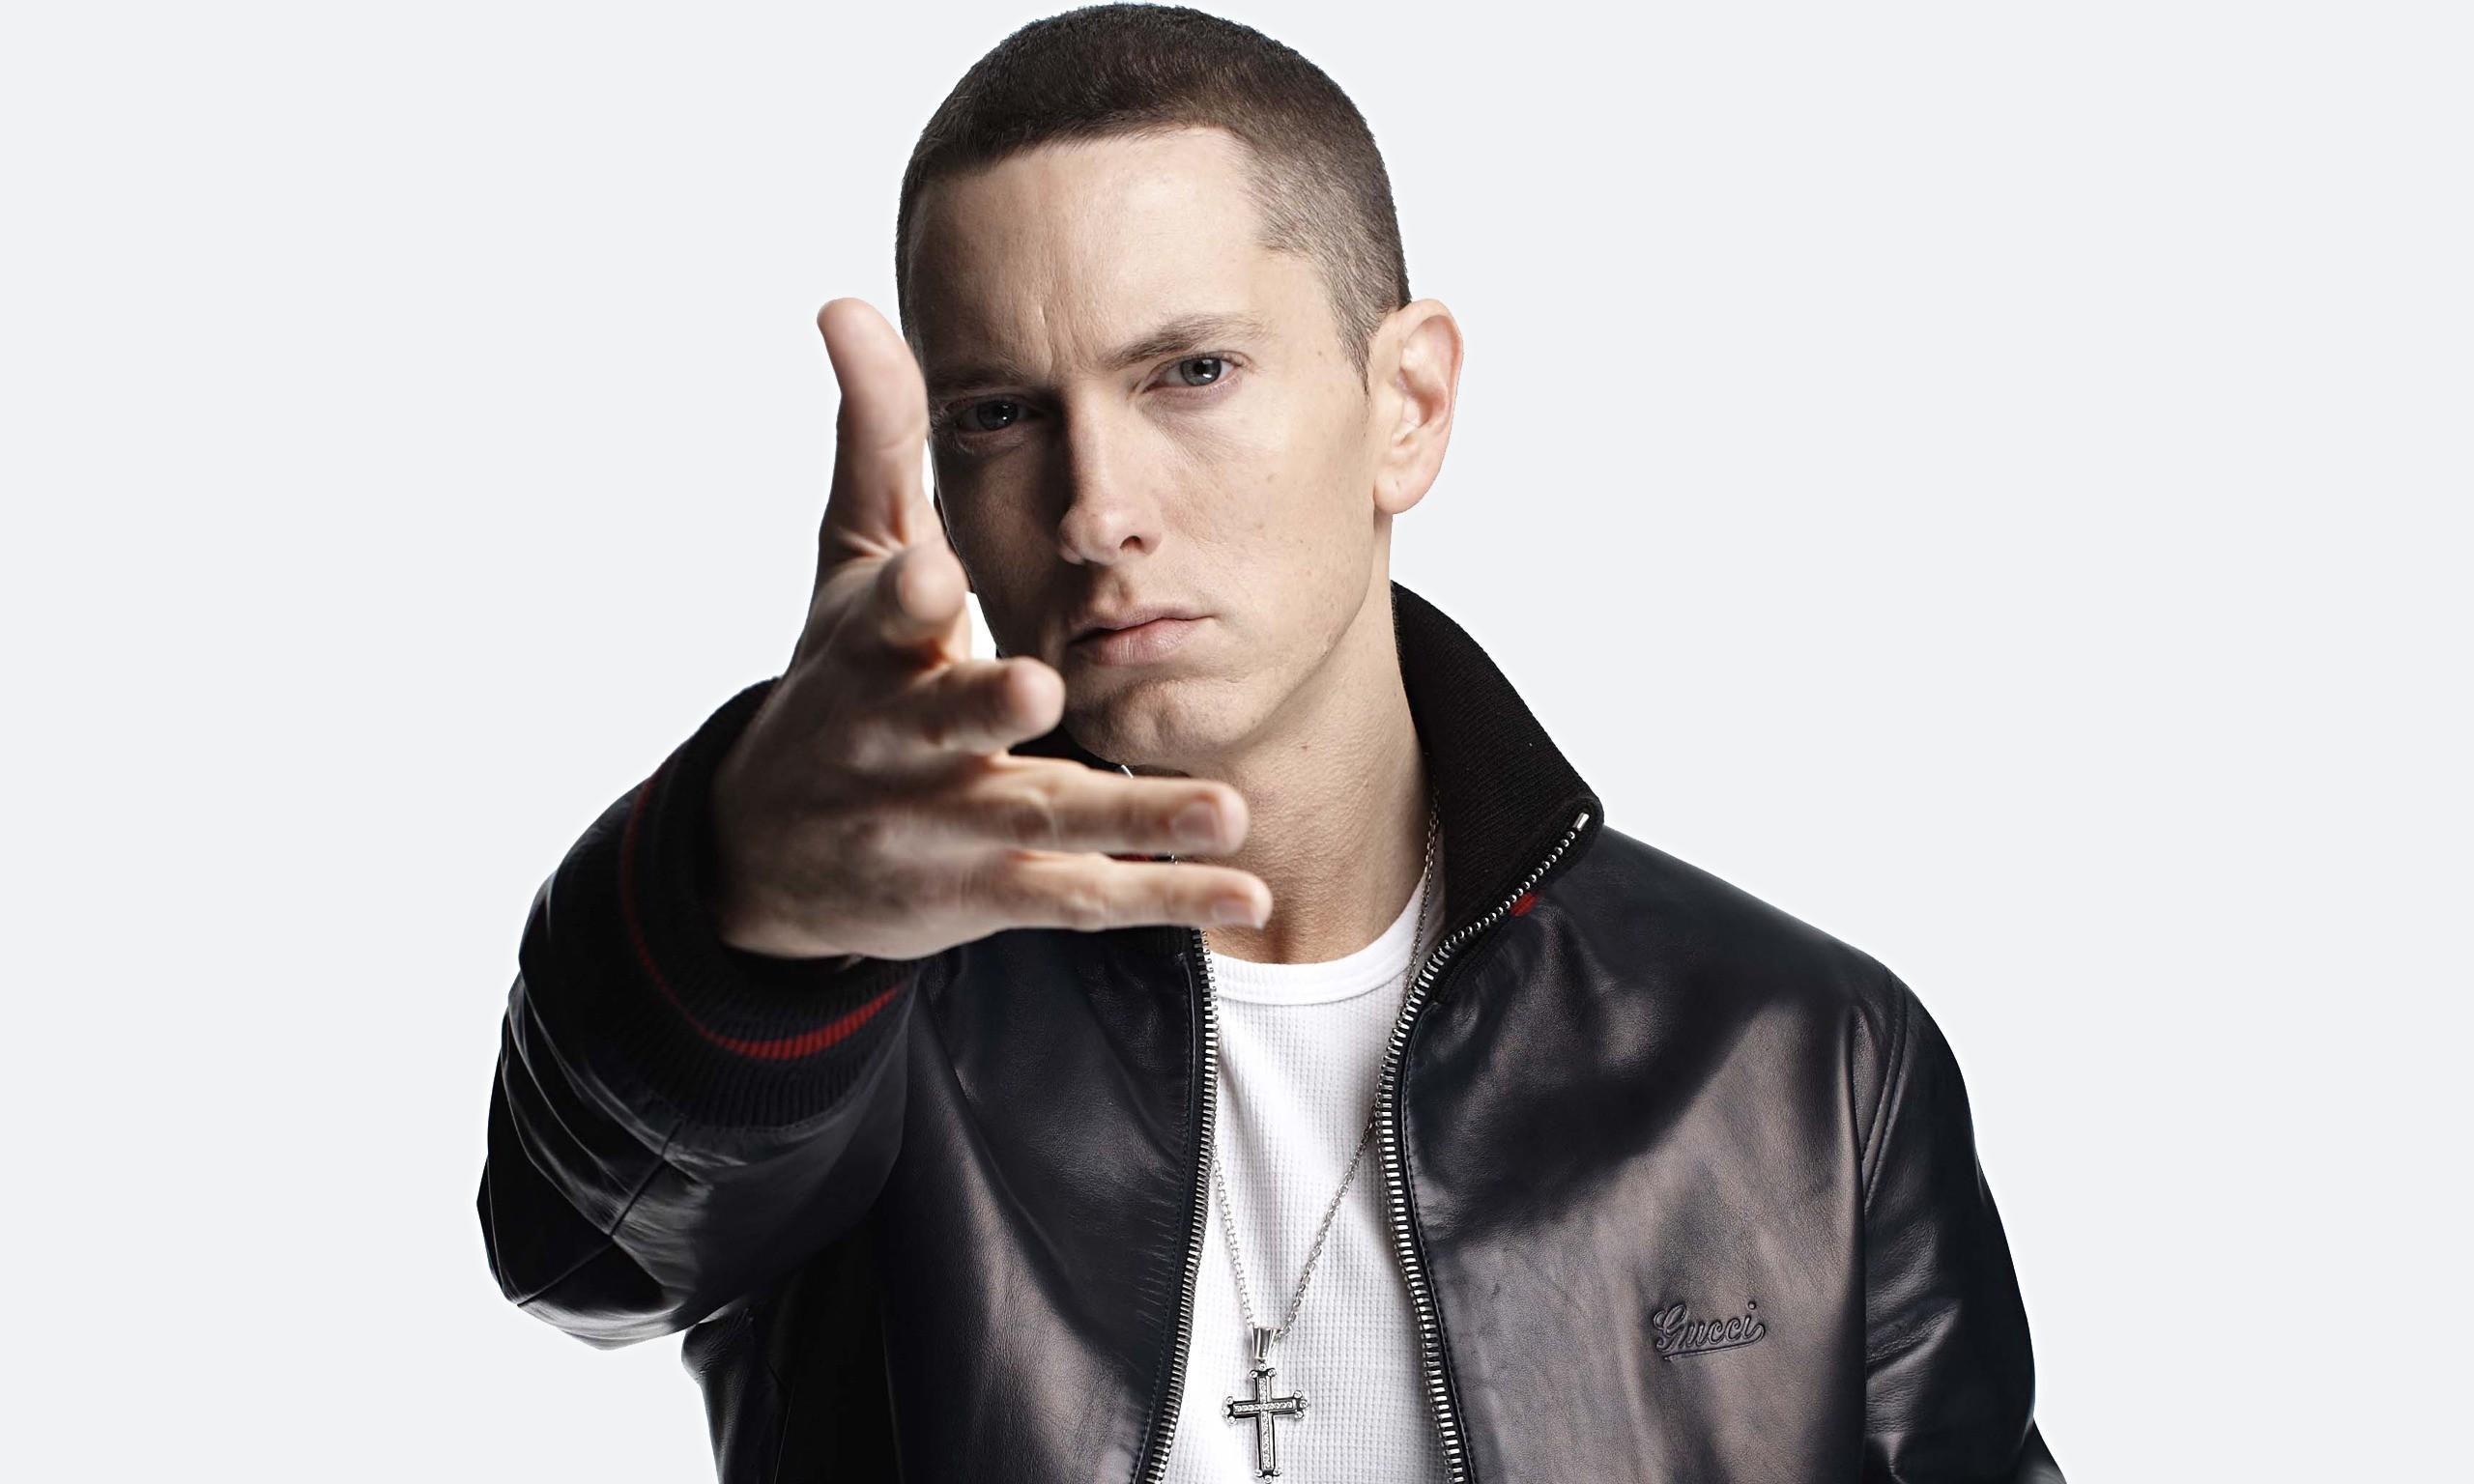 Eminem finished off 2018 as one of the best selling artists